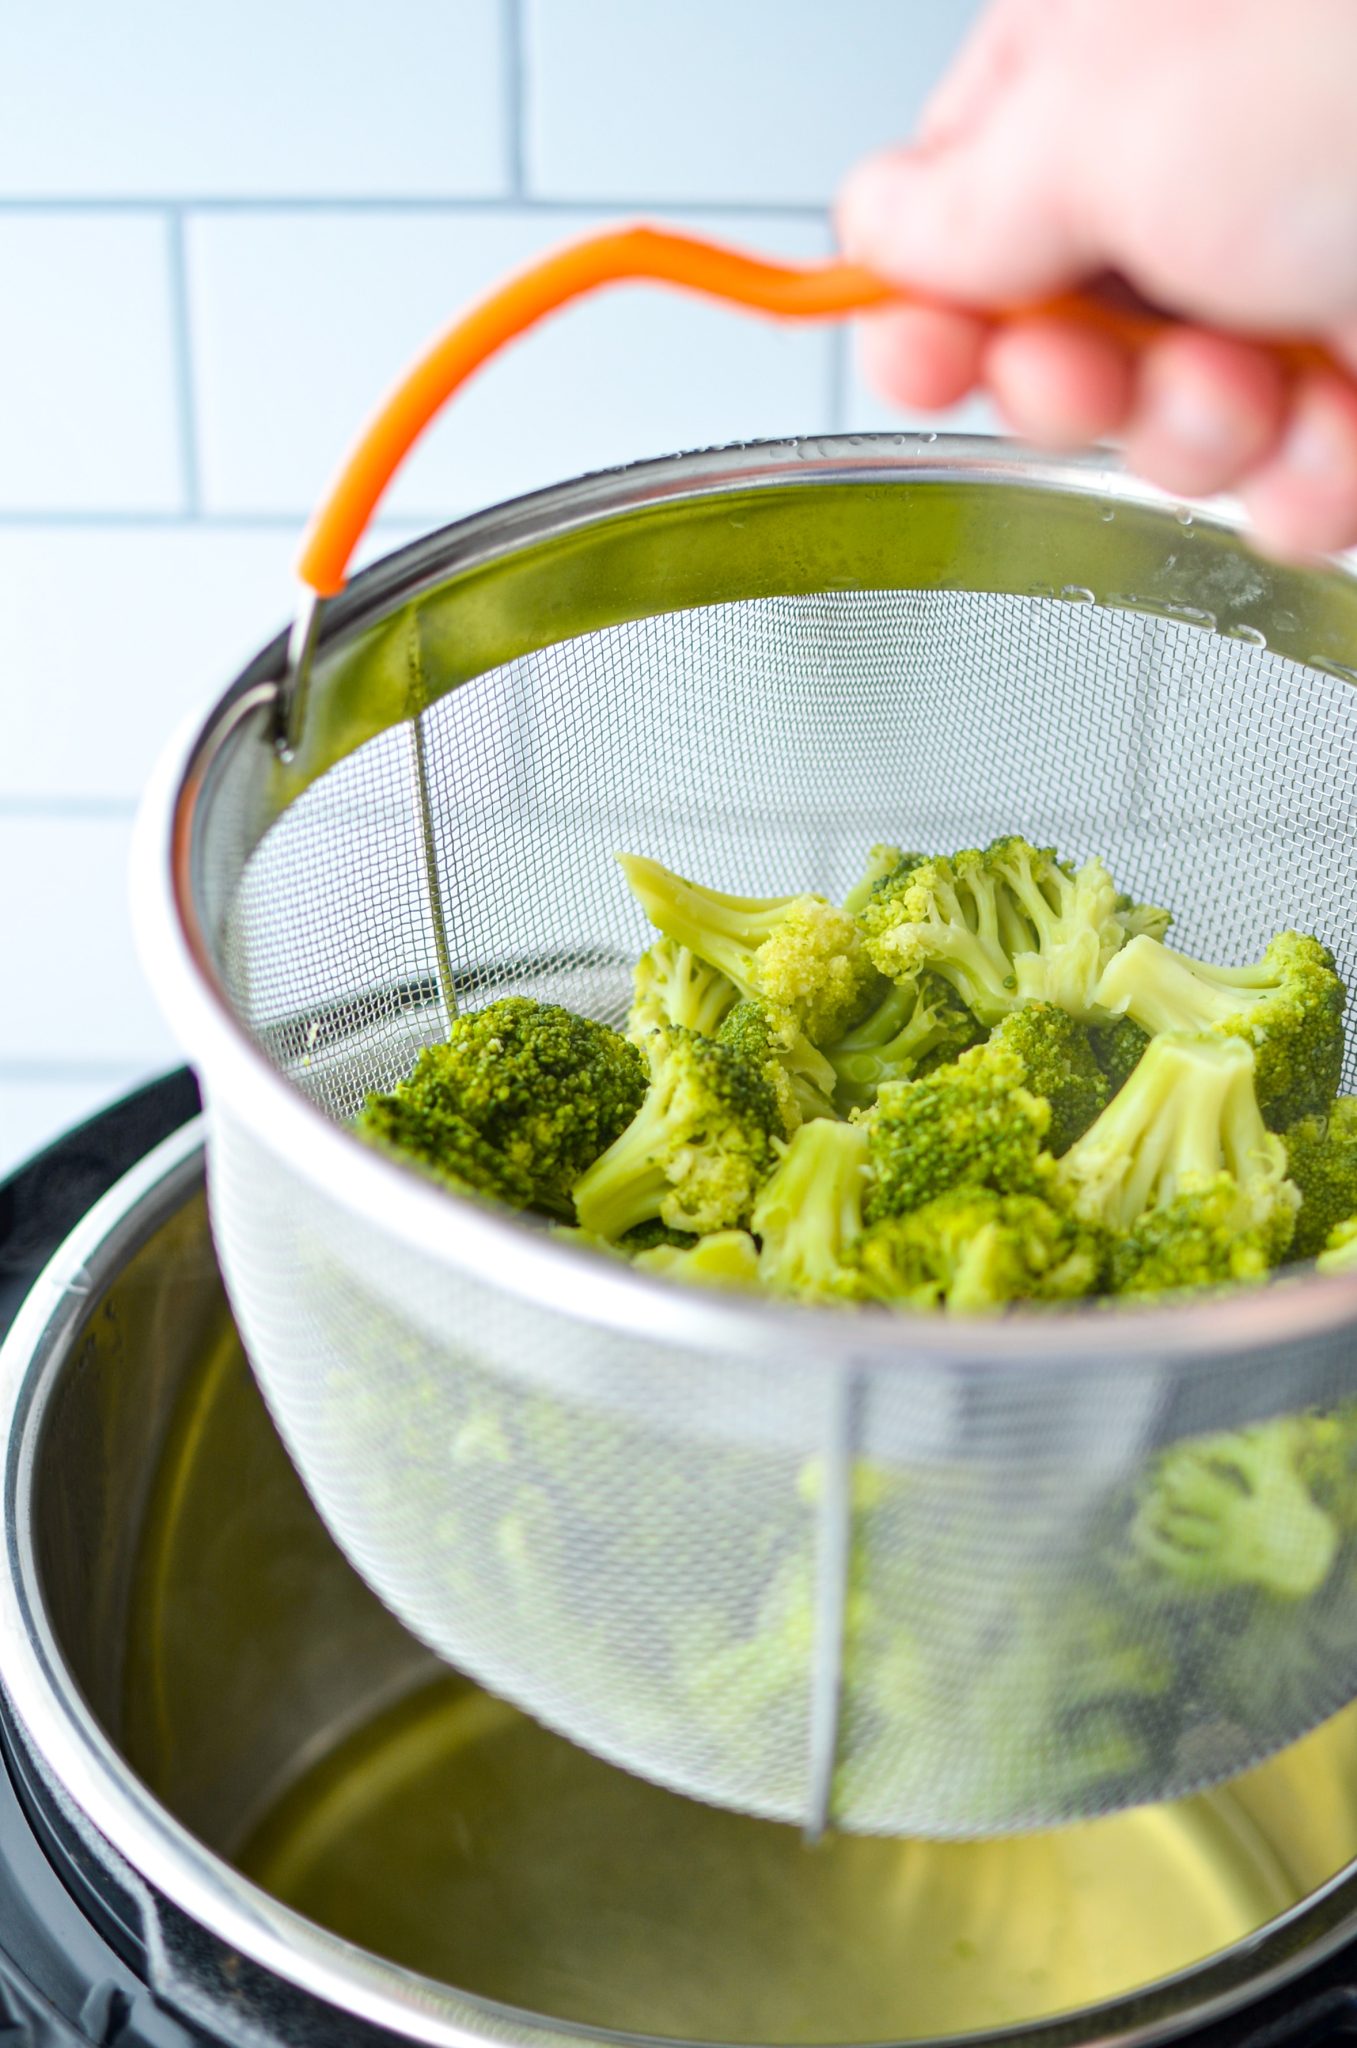 Lifting the steamer basket out of the Instant Pot with cooked broccoli inside.